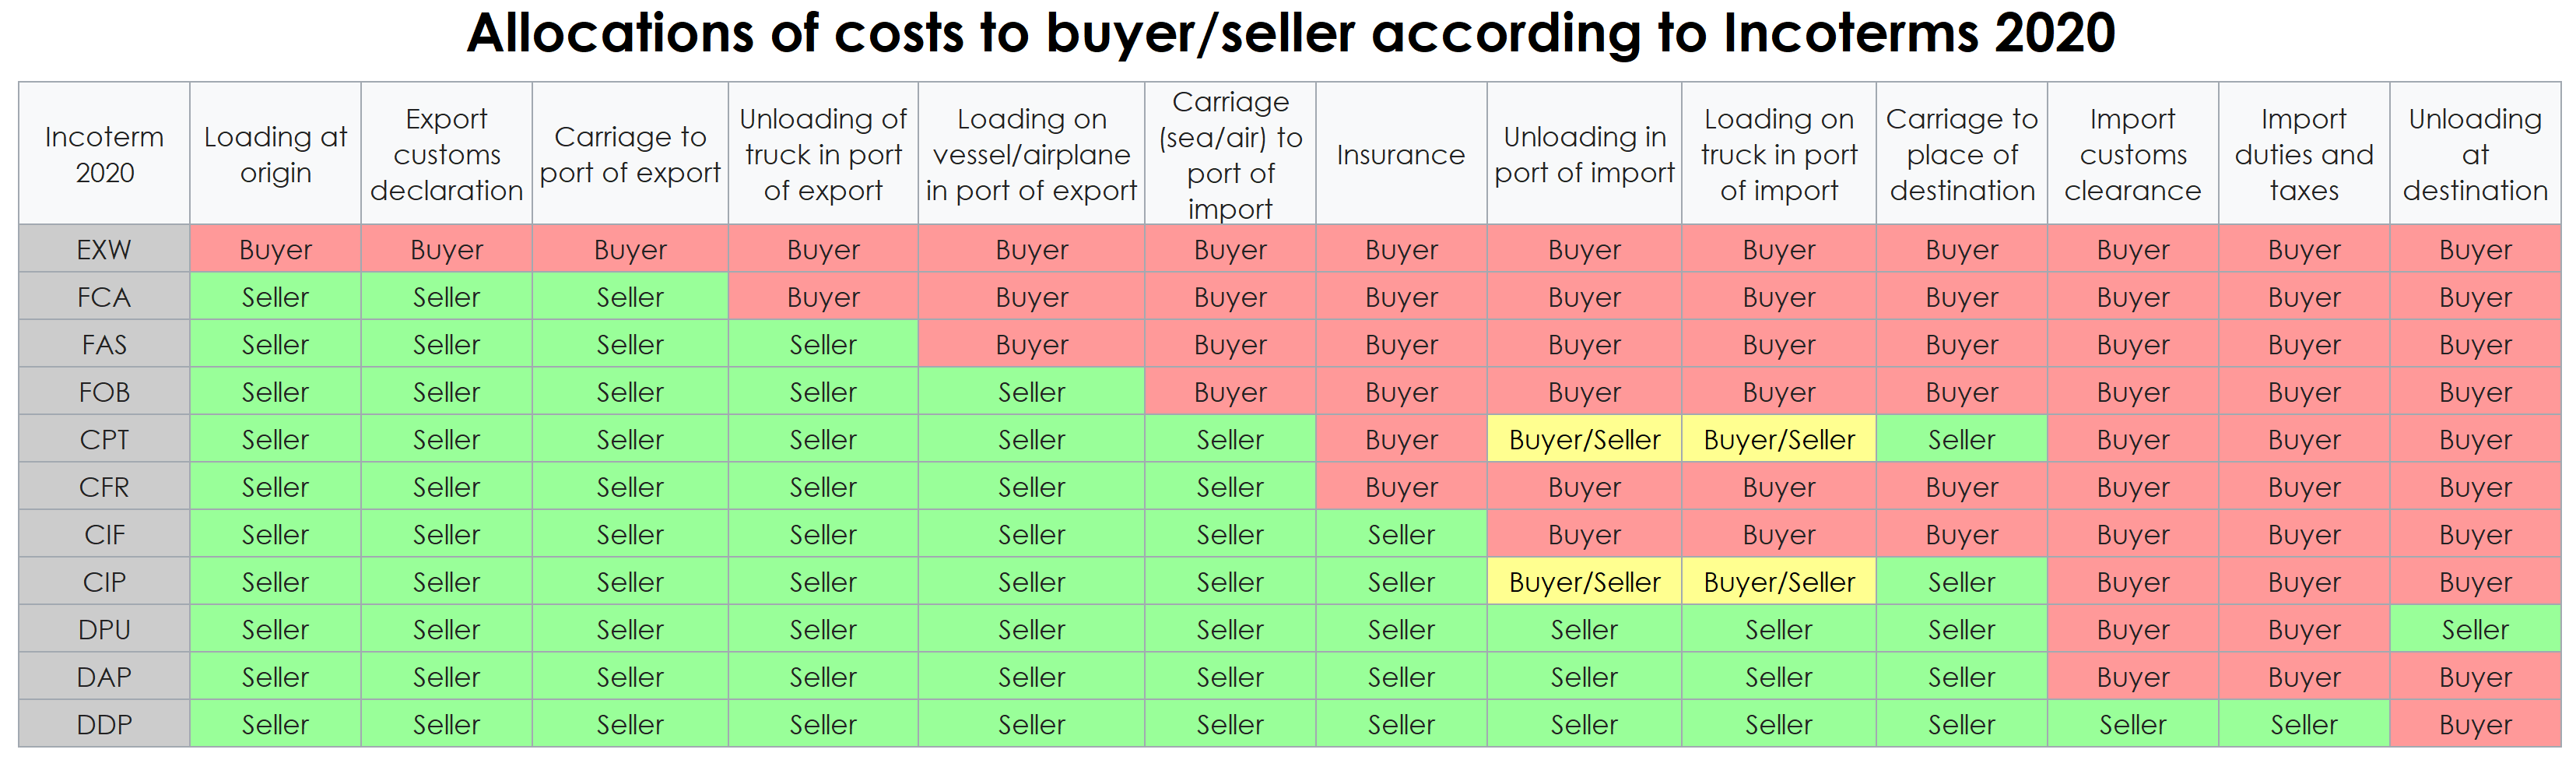 cost allocations according to incoterms 2020